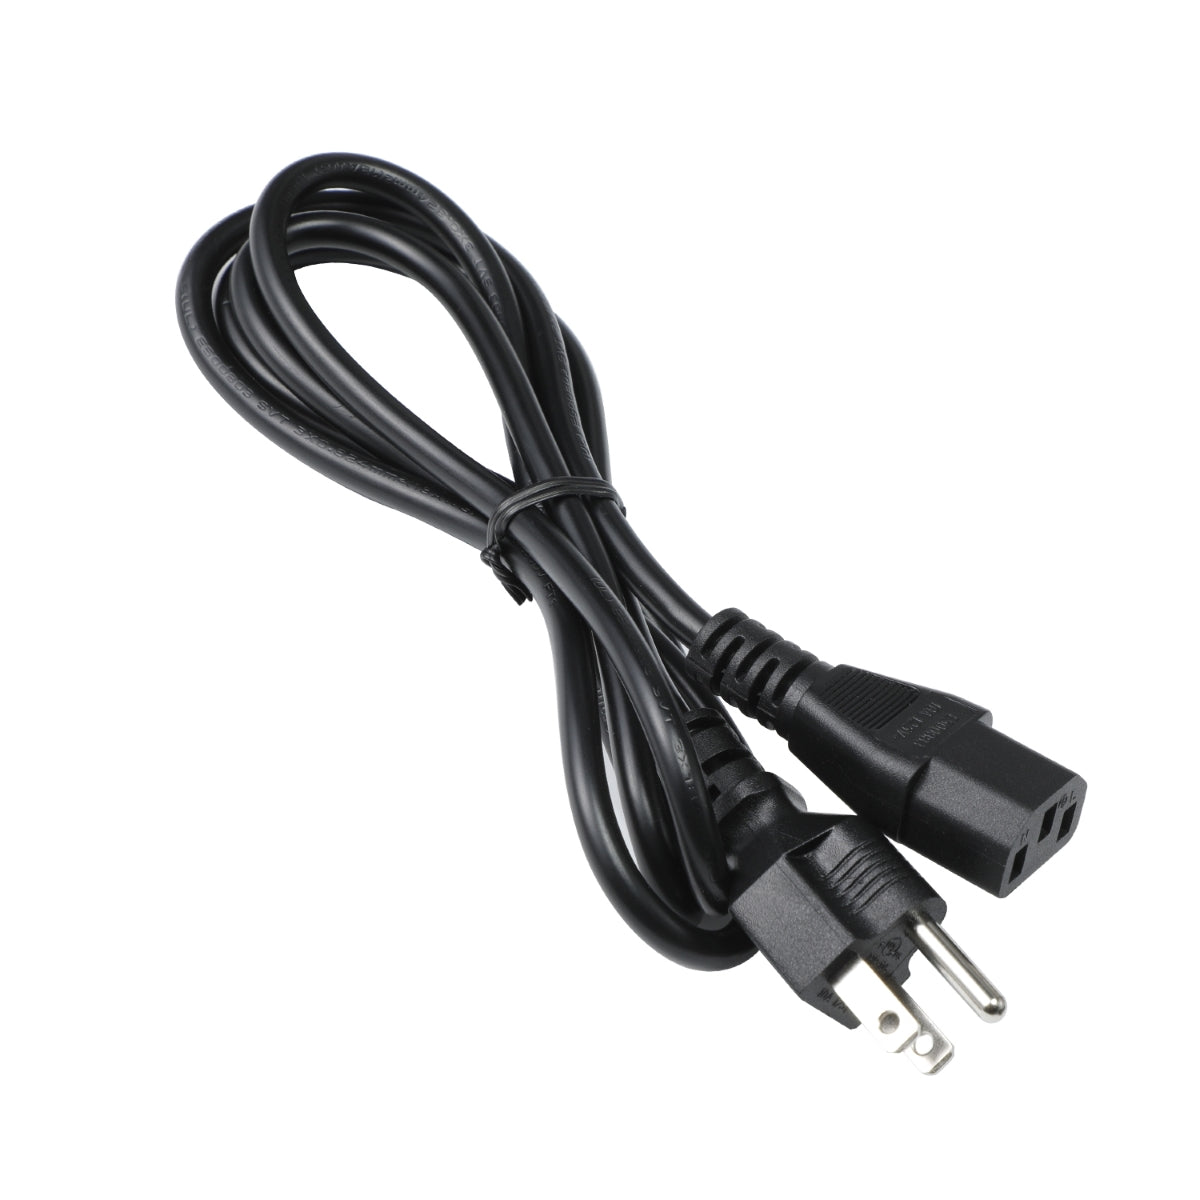 Power Cord for Dell SE2419HR Monitor